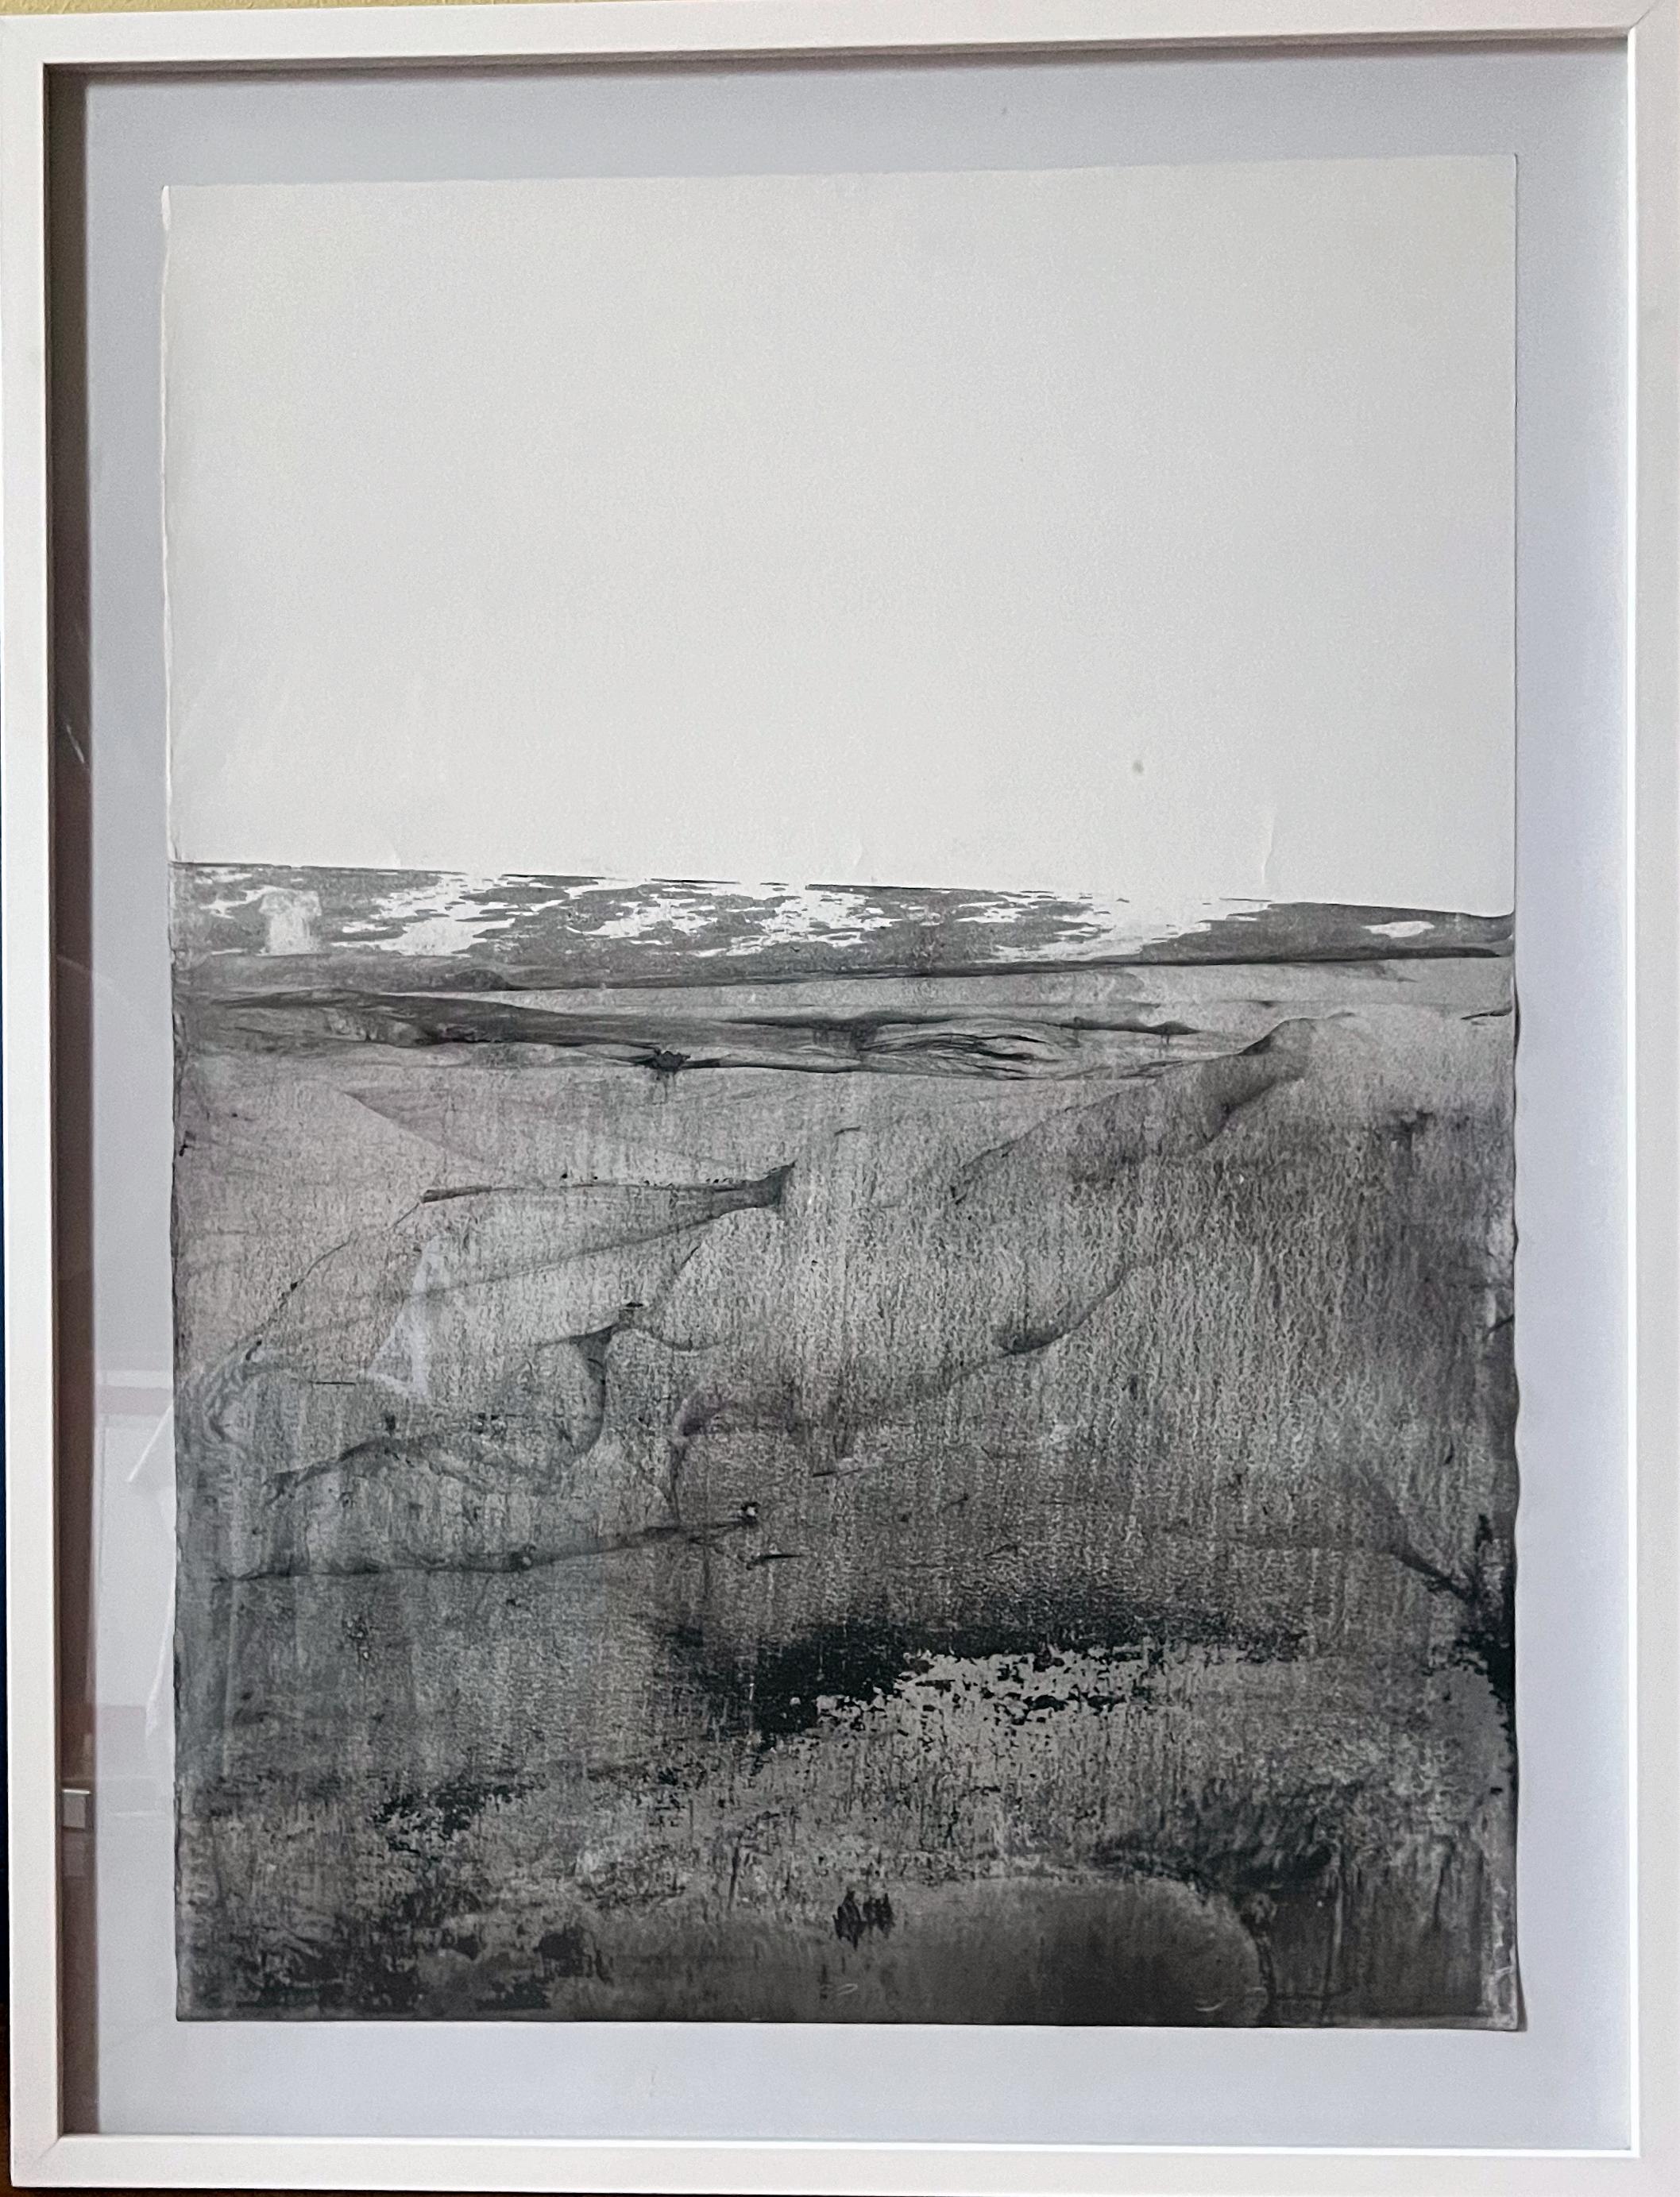 Landscape BW, Original Art on Paper , Ready to Hang, by Marilina Marchica